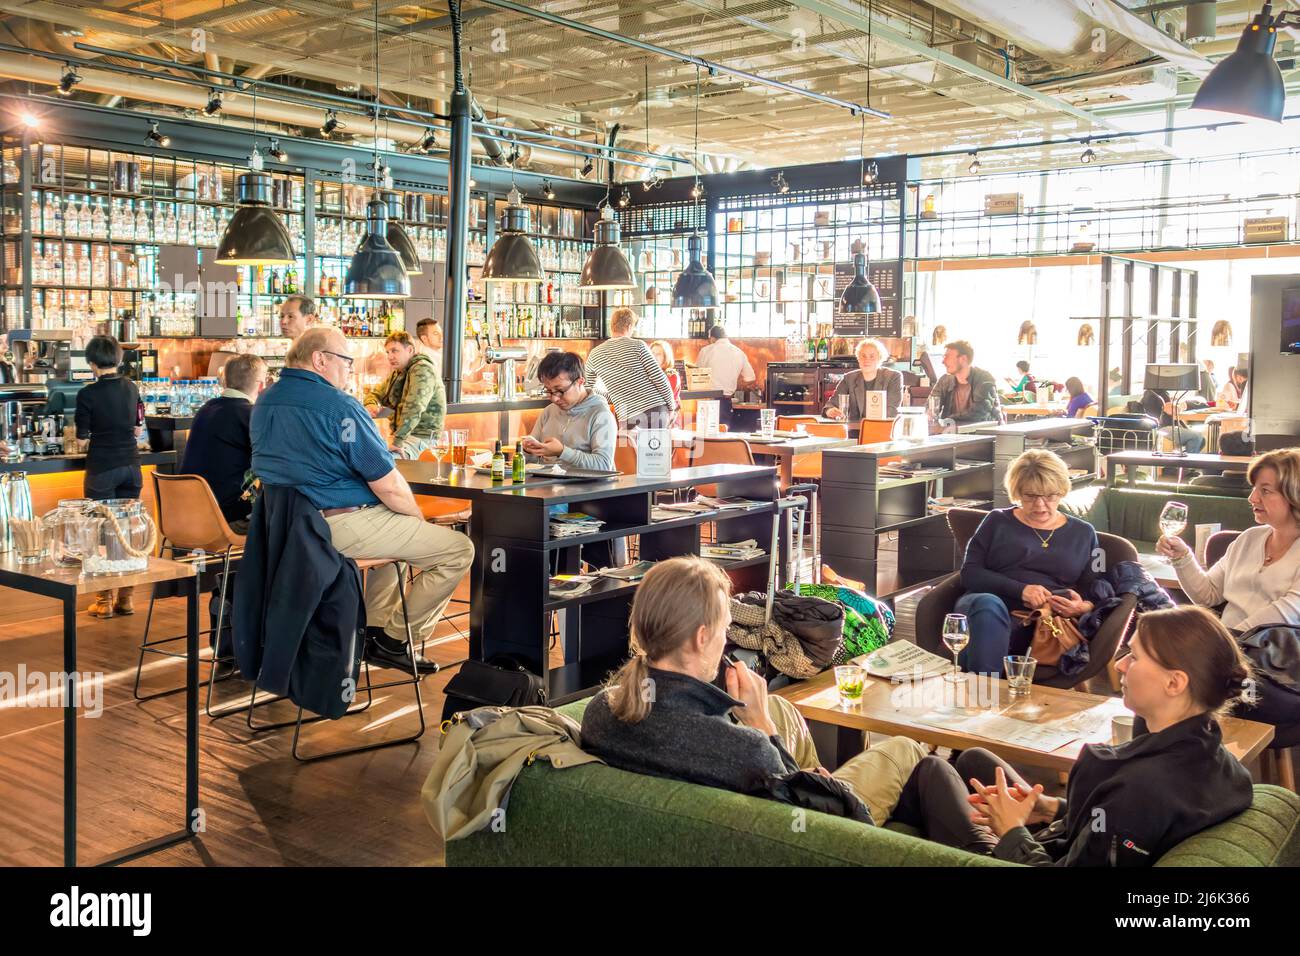 People relax at a restaurant bar at Helsinki Vantaa International Airport Finland in Helsinki, Finland on a sunny day. Stock Photo